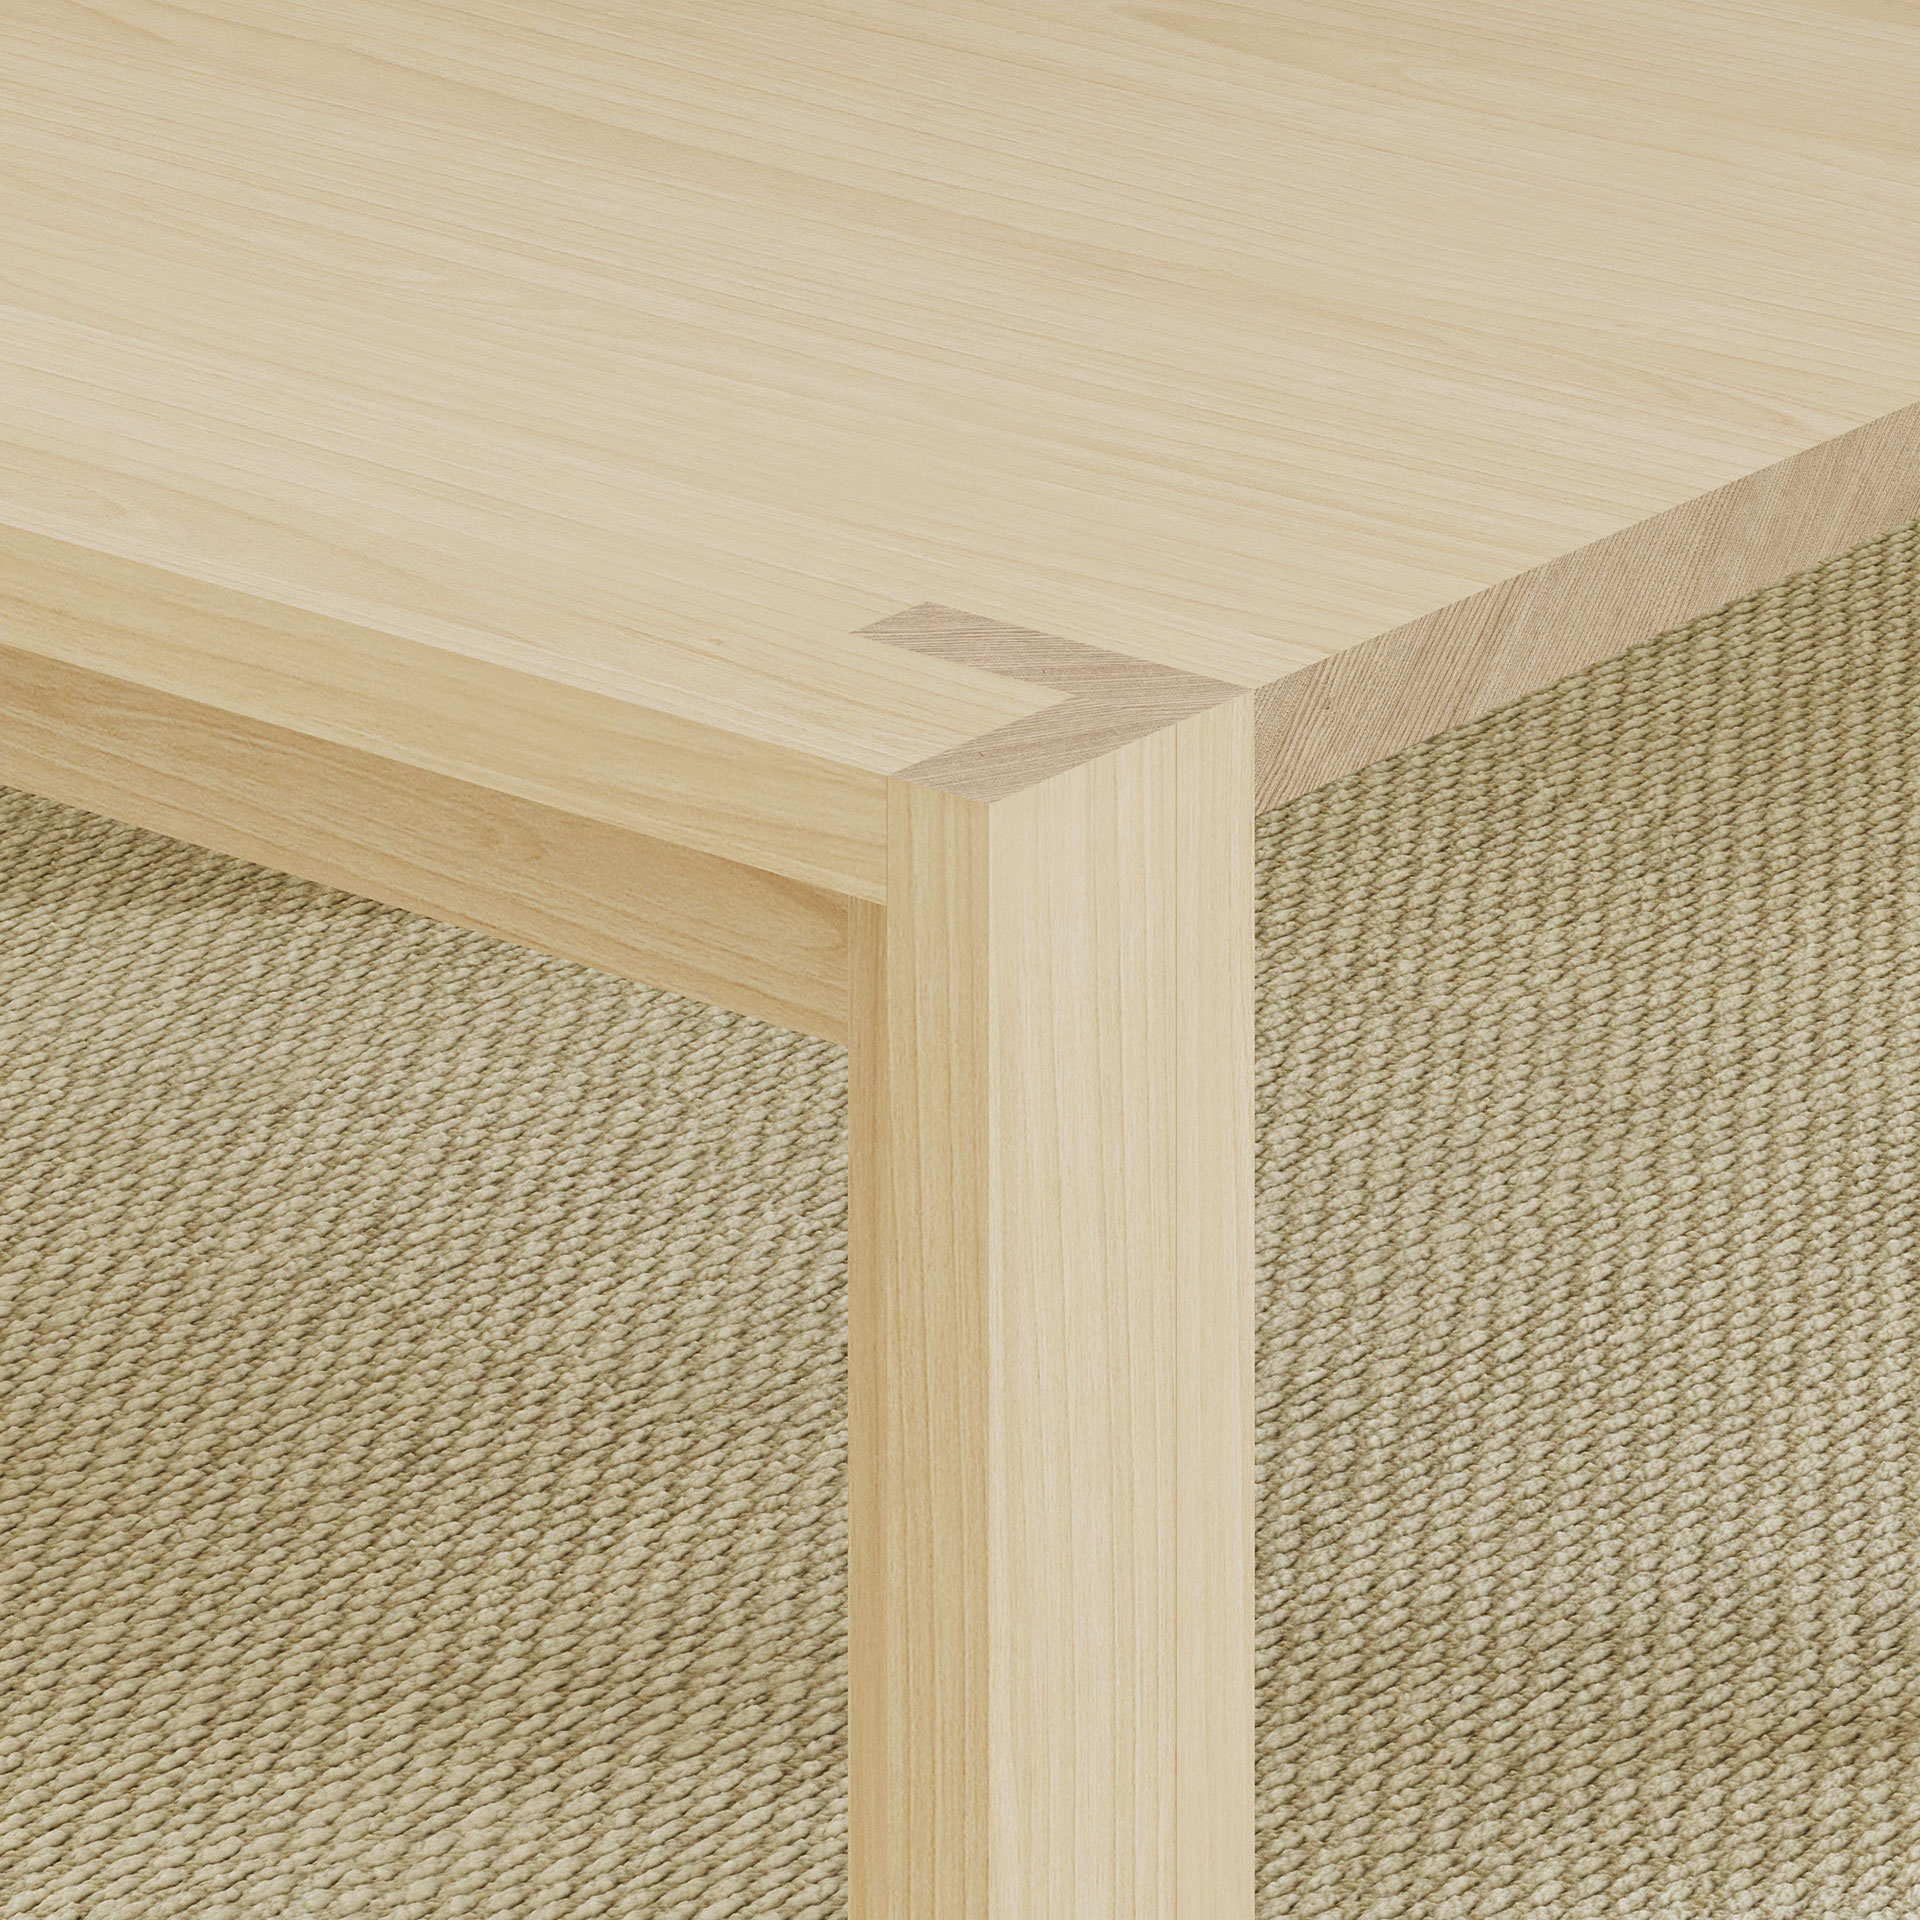 INTERVAL Coffee Table focuses on traditional craftsmanship and shapely details